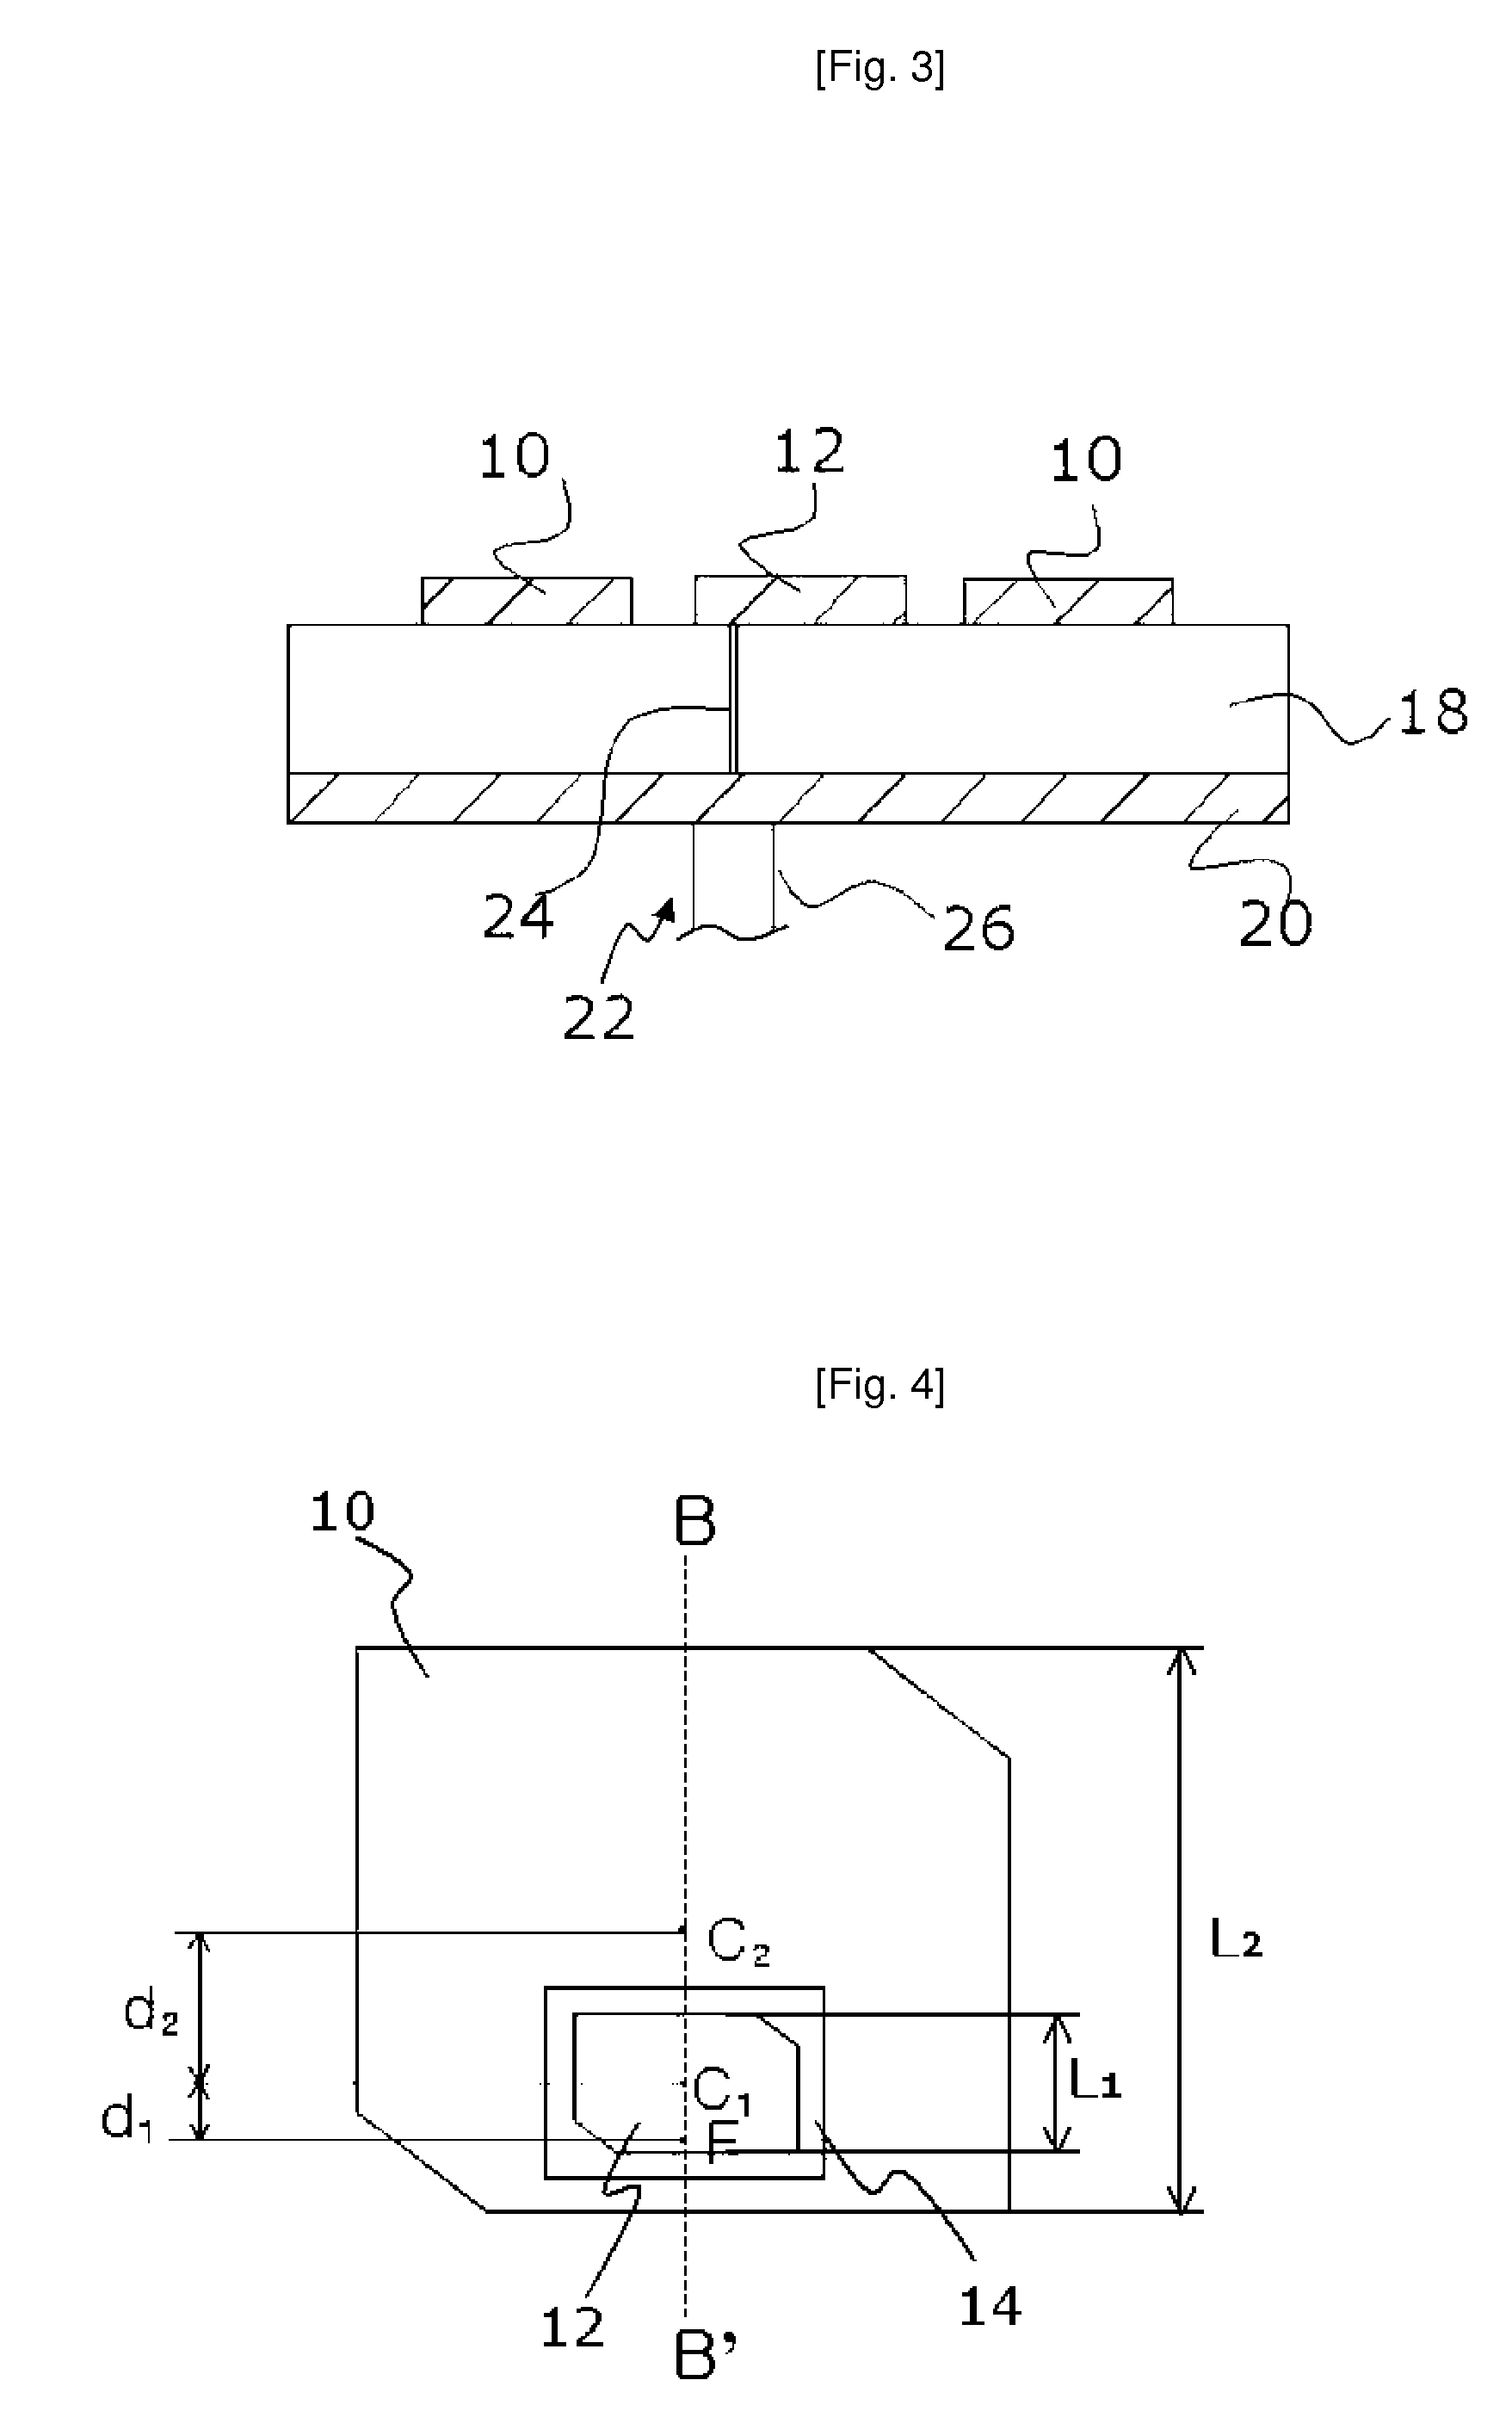 Single layer dual band antenna with circular polarization and single feed point